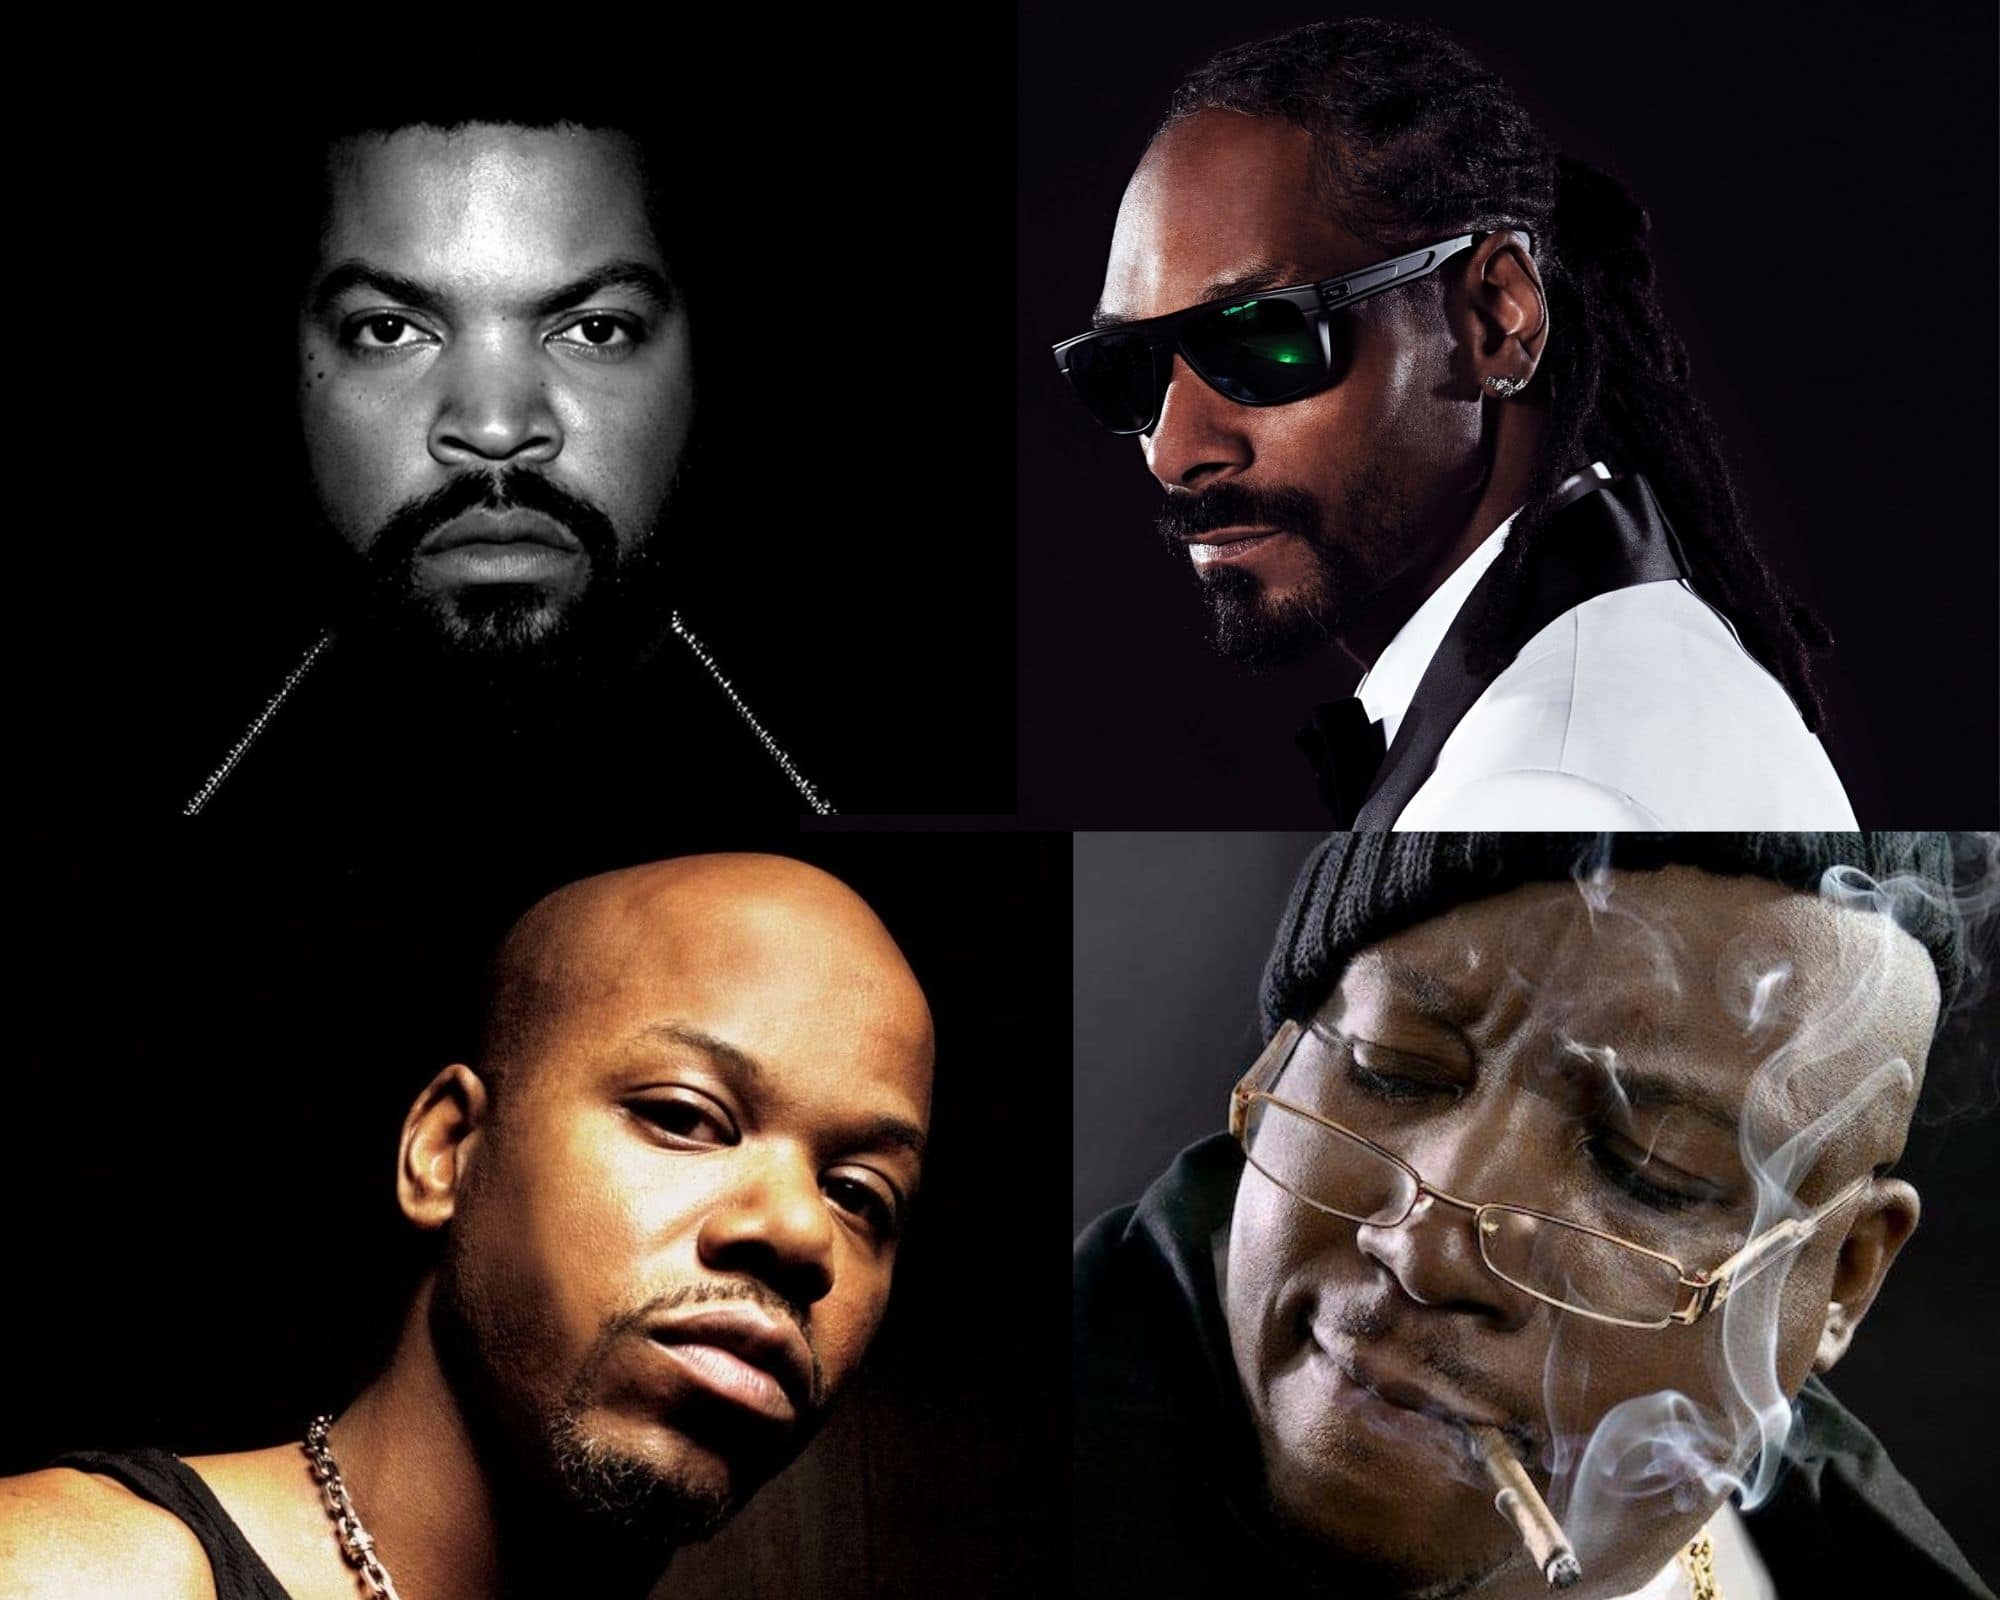 Snoop, Ice Cube, Too Short and E40 Form “Mt. Rushmore” Hip Hop Group!!!